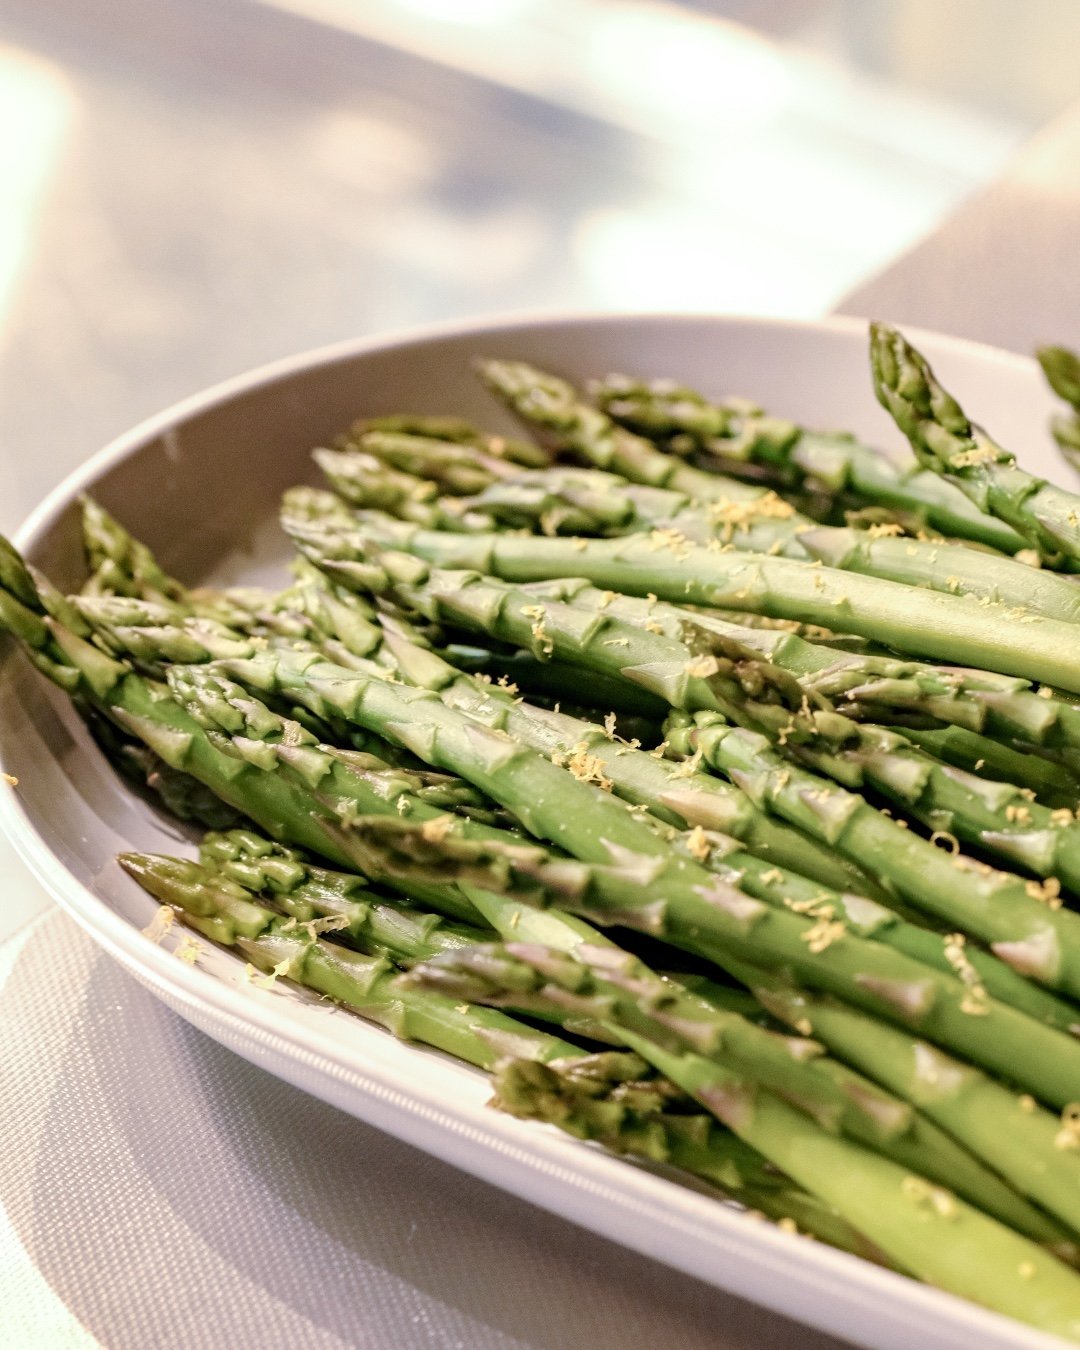 Spring is here which means it&rsquo;s time just about time to start adding those early spring crops like asparagus into your dishes. 

Looking for a little inspiration? Check out today&rsquo;s stories for our Pasta Primavera recipe best served with f